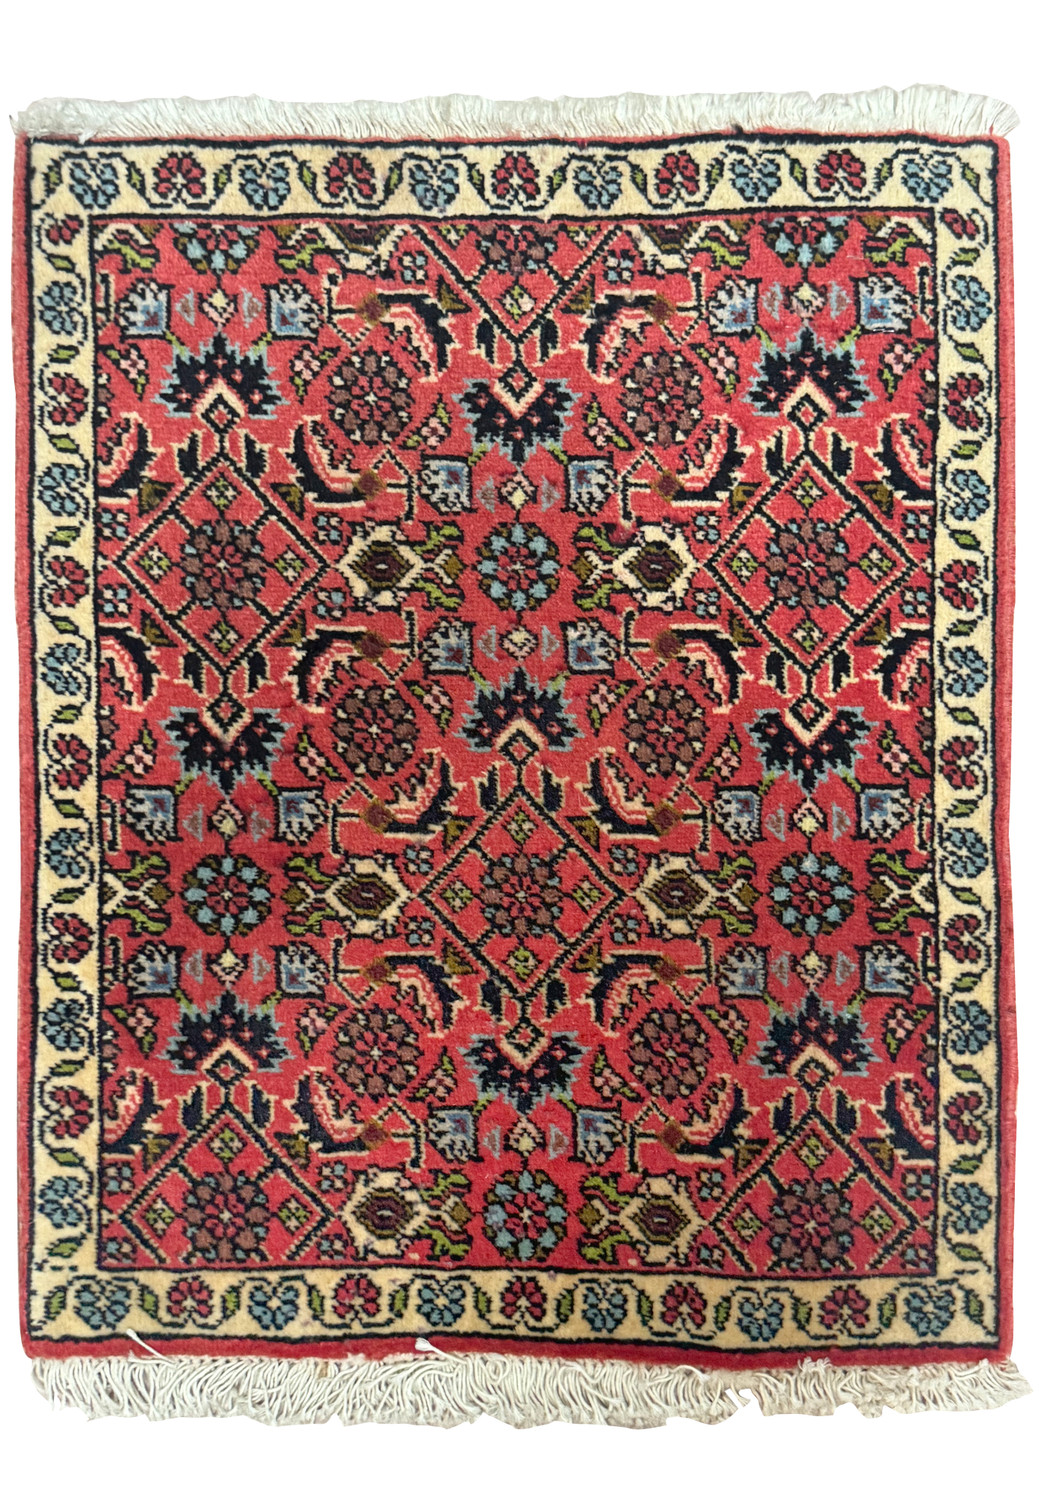 Intricate floral and geometric patterns on a 1'3" x 2' Persian Bijar Baby Rug with a dominant red field and navy blue border, showcasing detailed craftsmanship on a miniature scale.